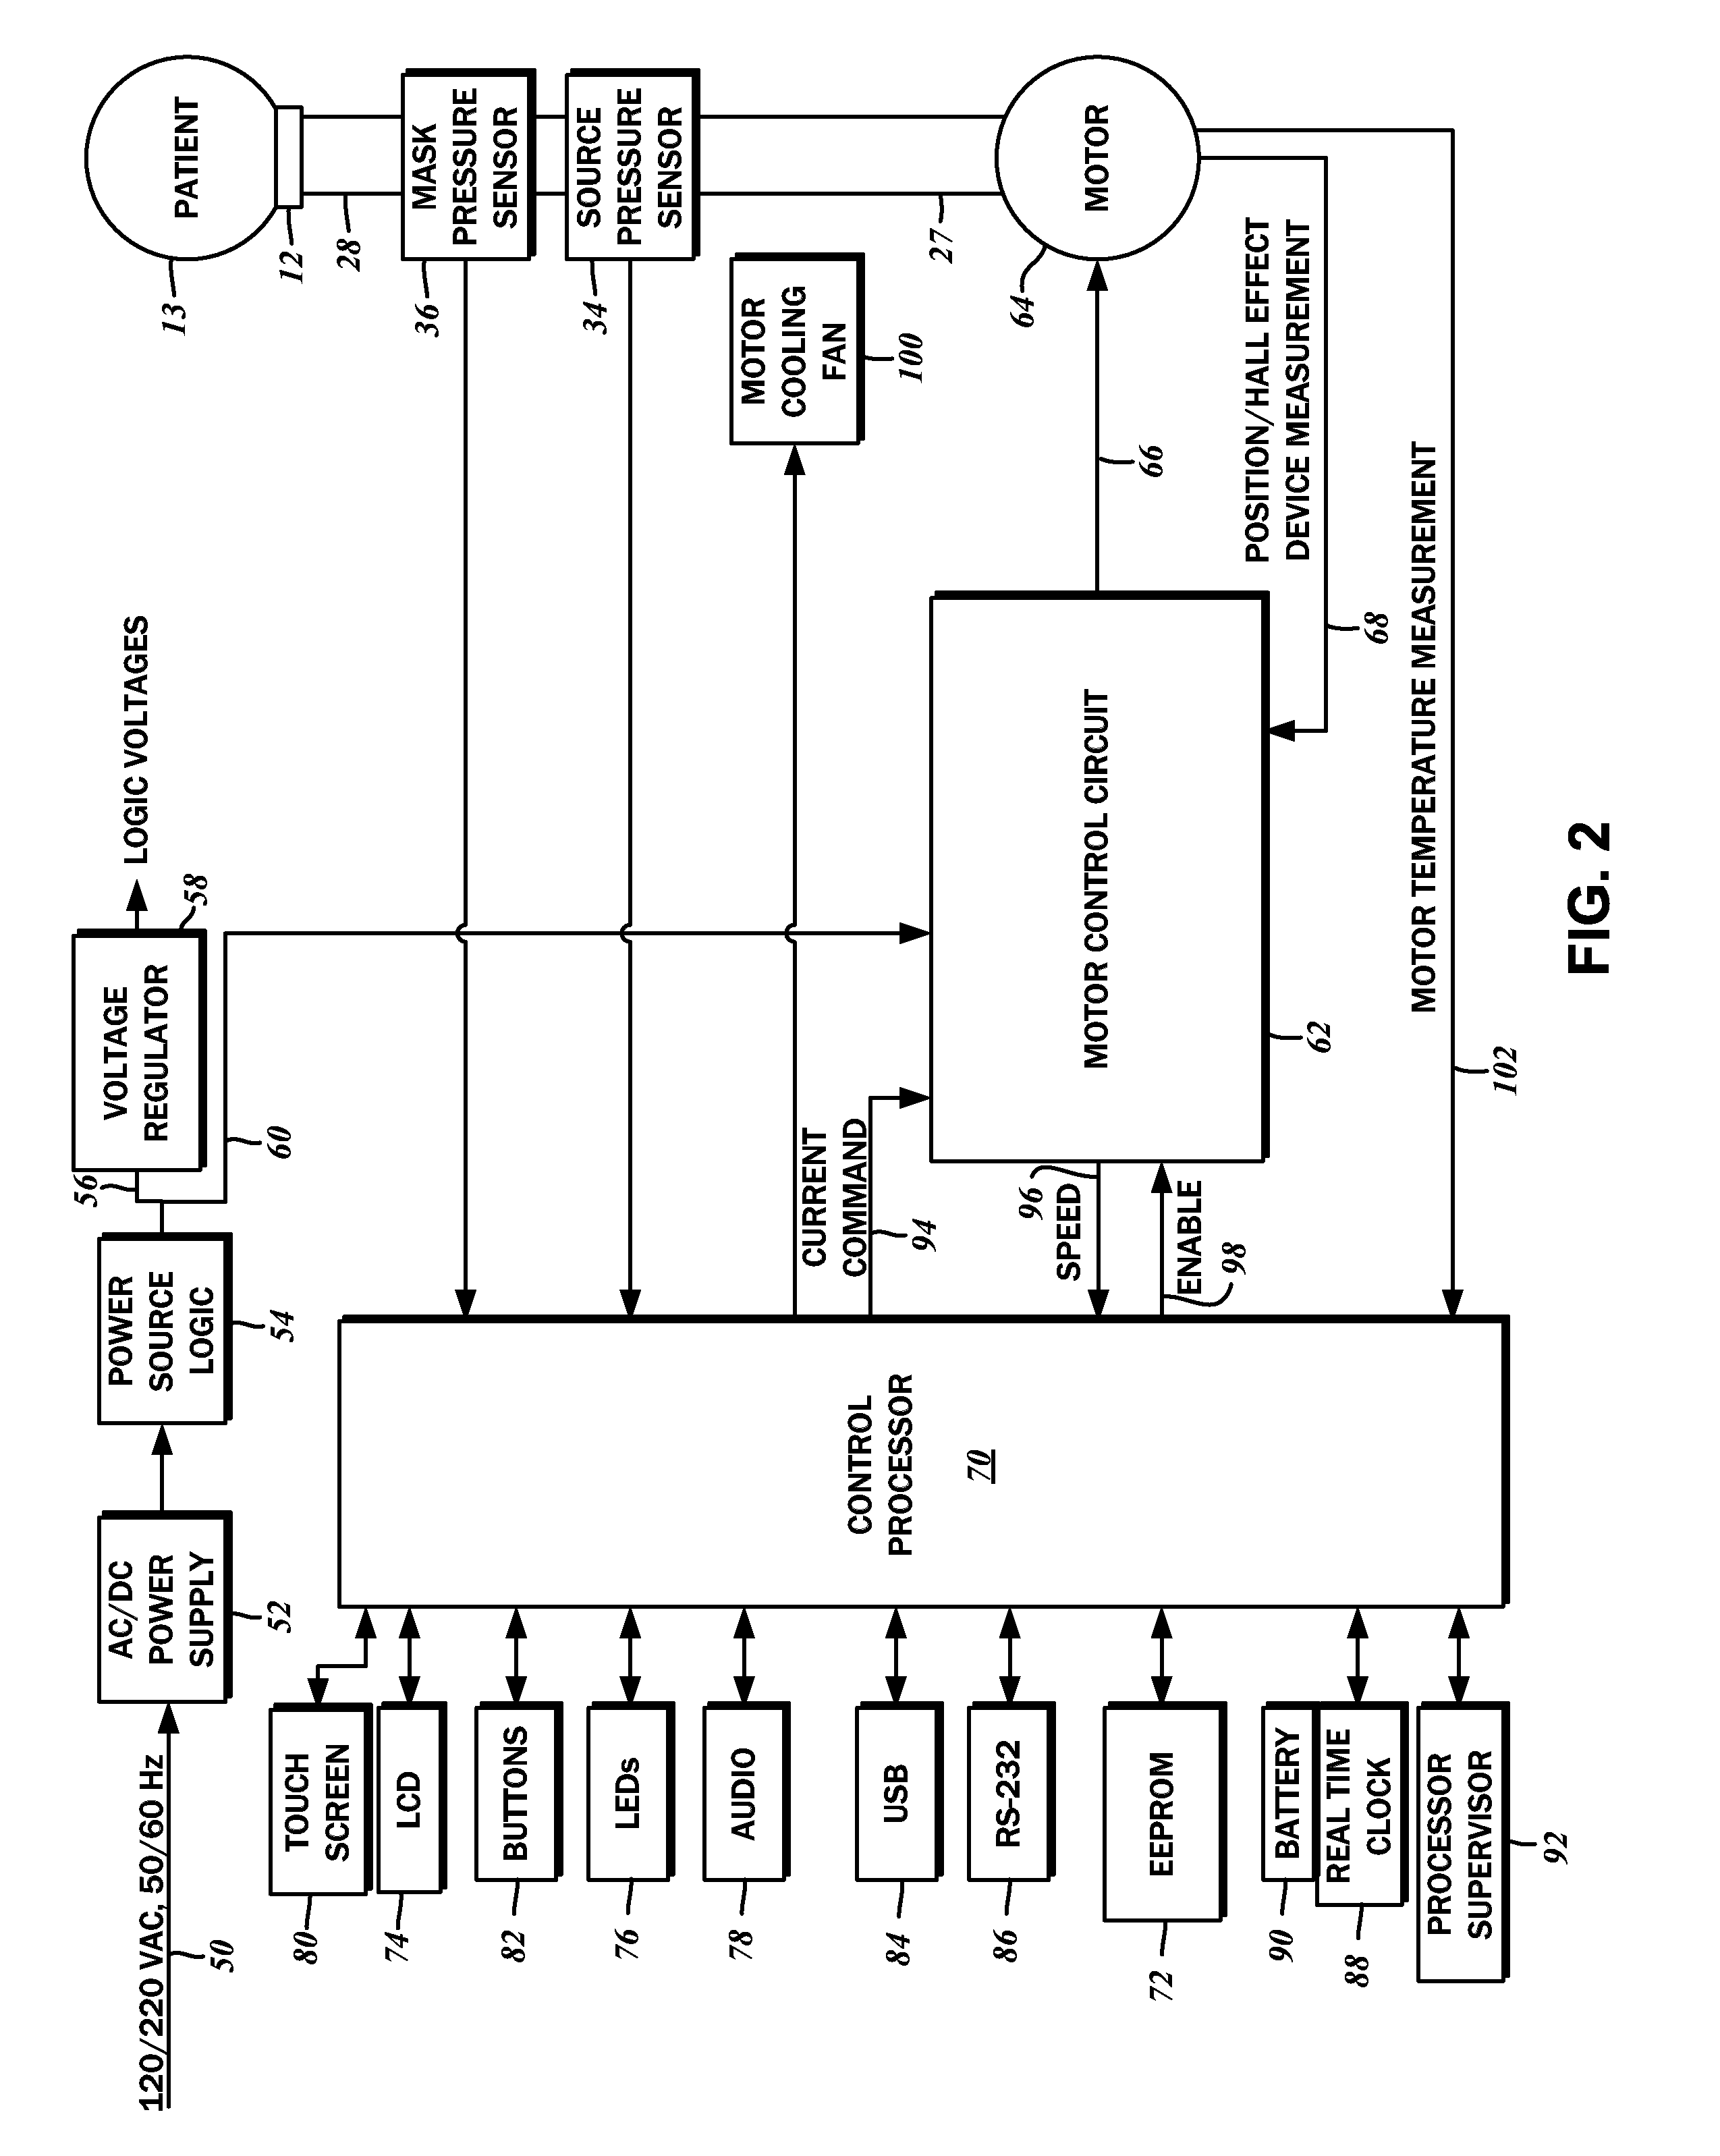 Method and system for operating a patient ventilation device